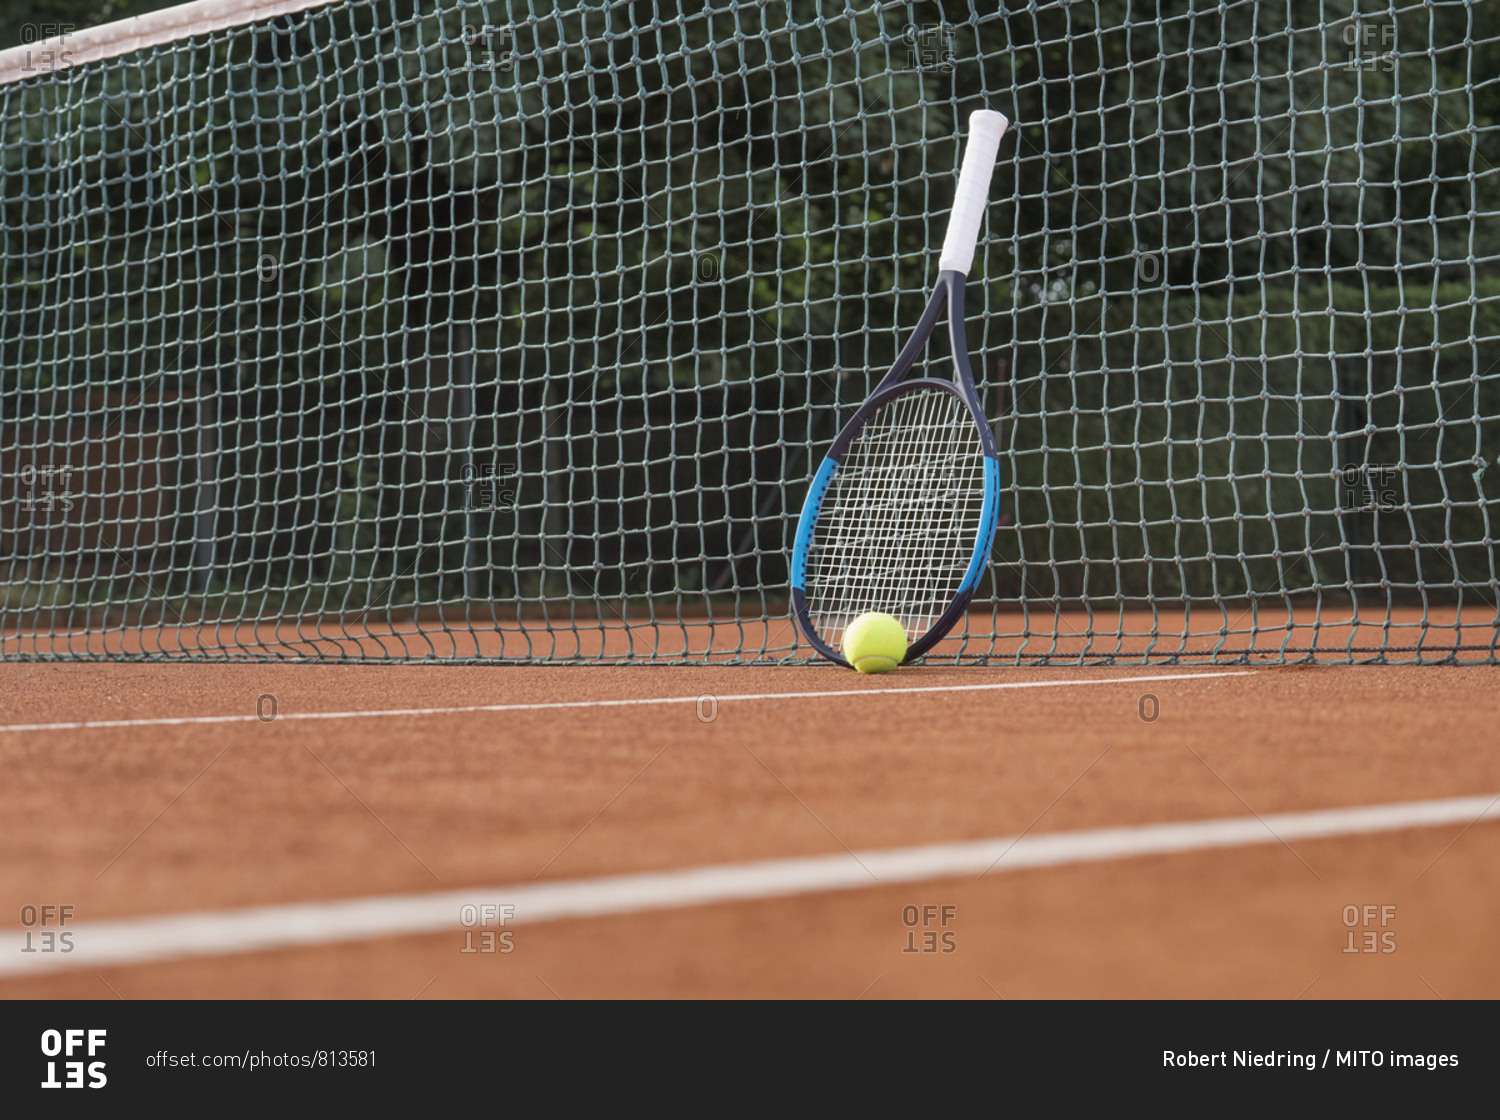 Tennis ball with racket leaning on net of tennis court, Bavaria, Germany